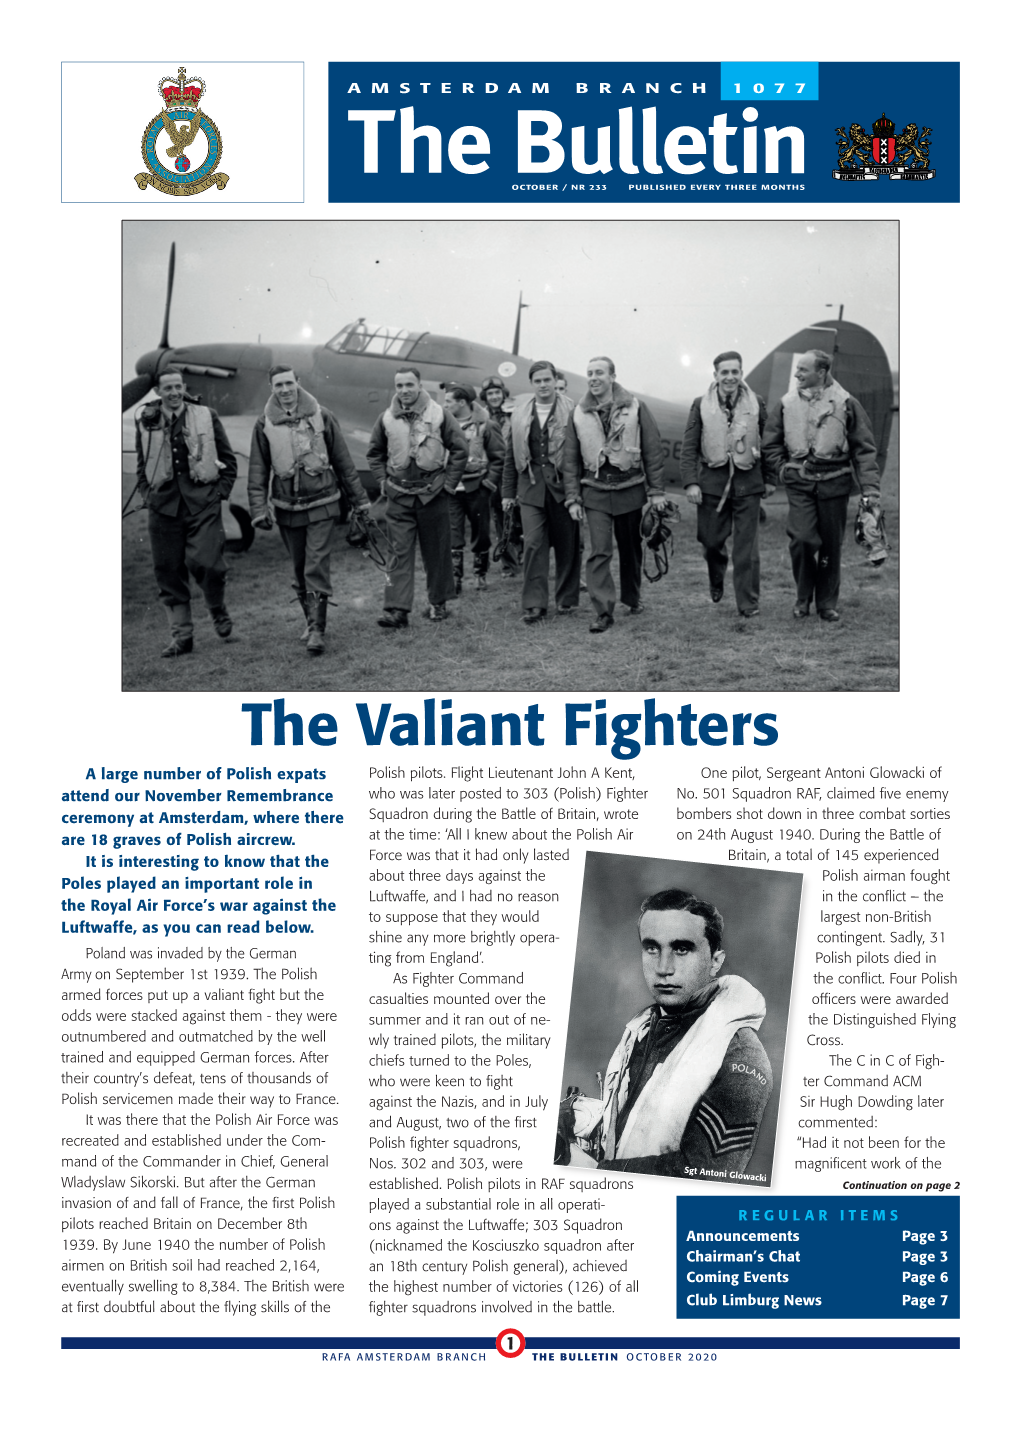 The Valiant Fighters a Large Number of Polish Expats Polish Pilots